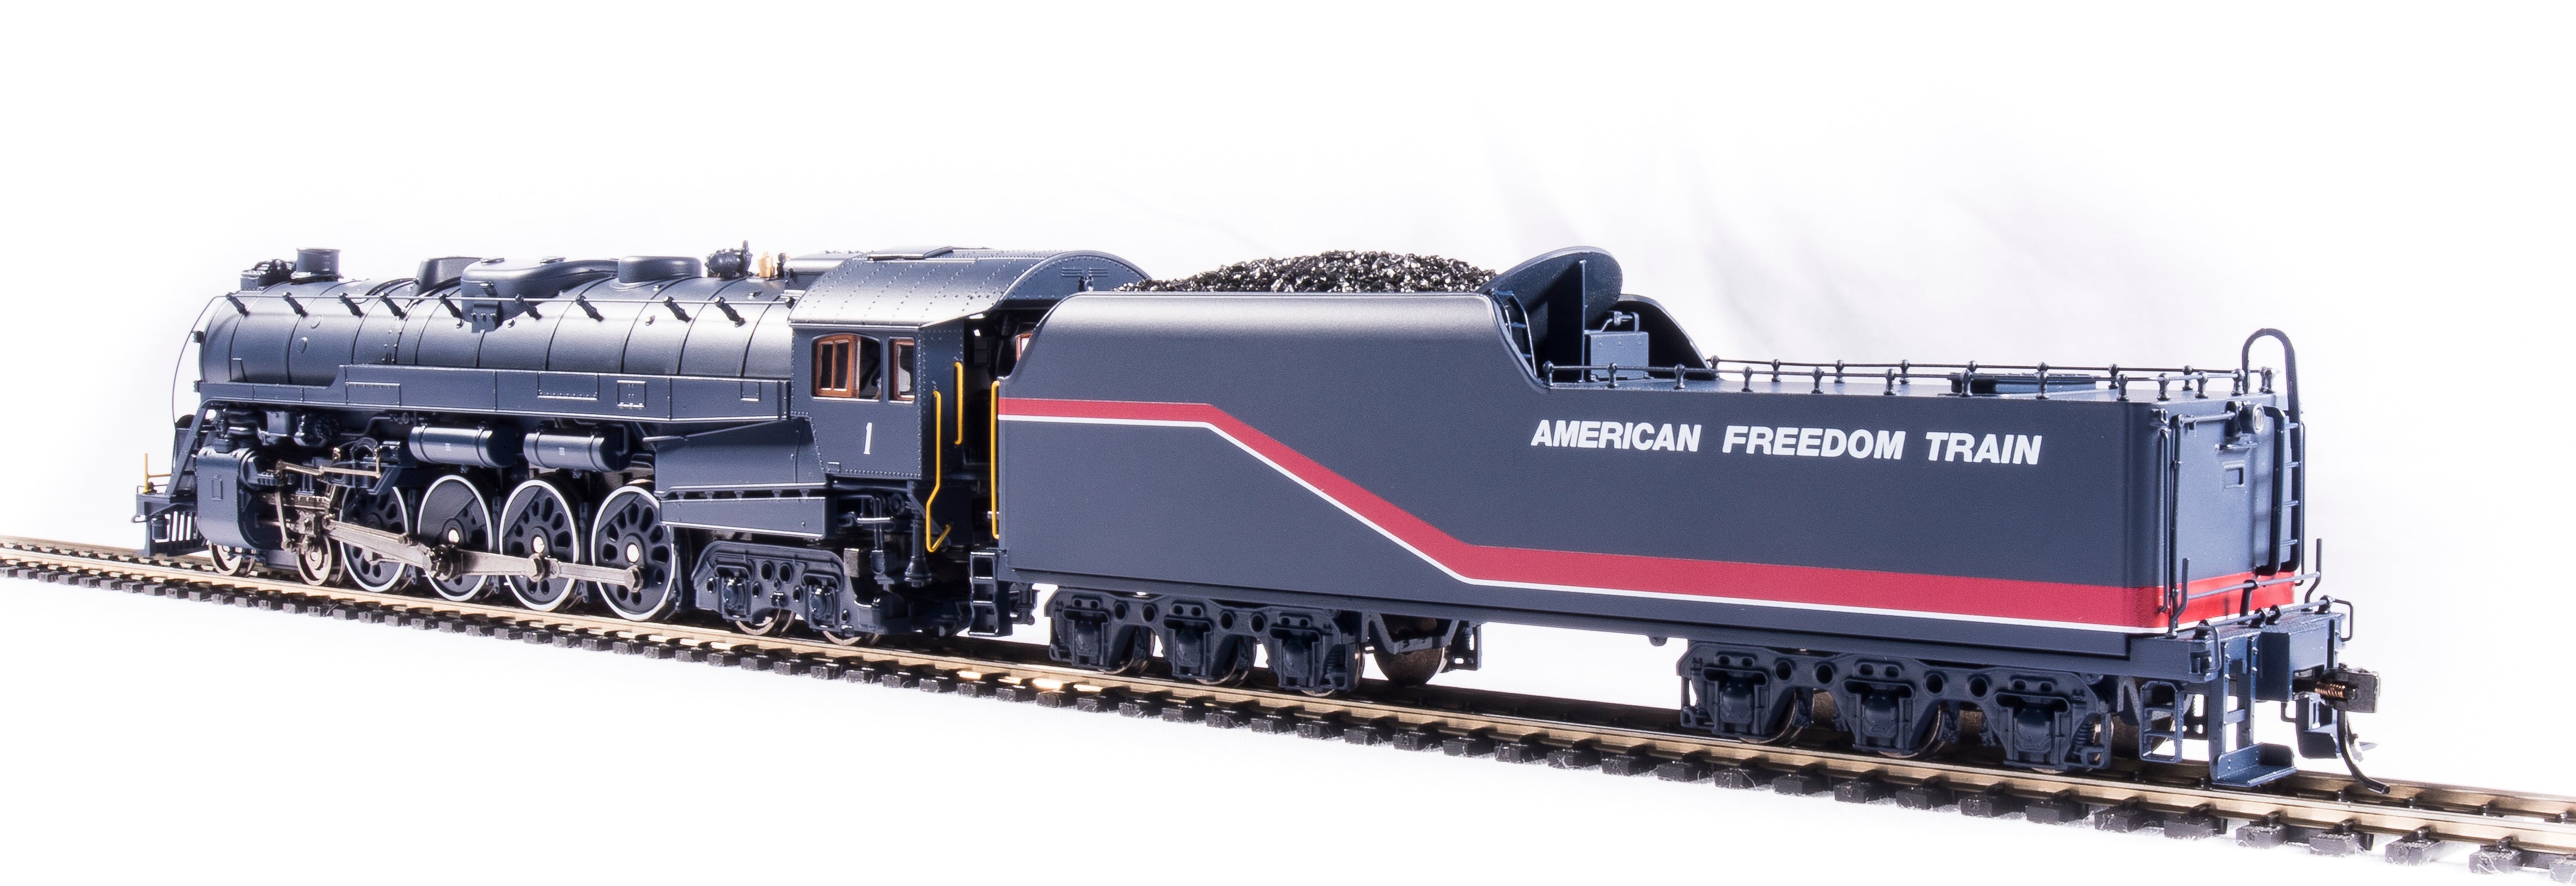 6808 Reading T1 4-8-4, American Freedom Train #1, Early 1975 Version, Paragon4 Sound/DC/DCC, Smoke, HO